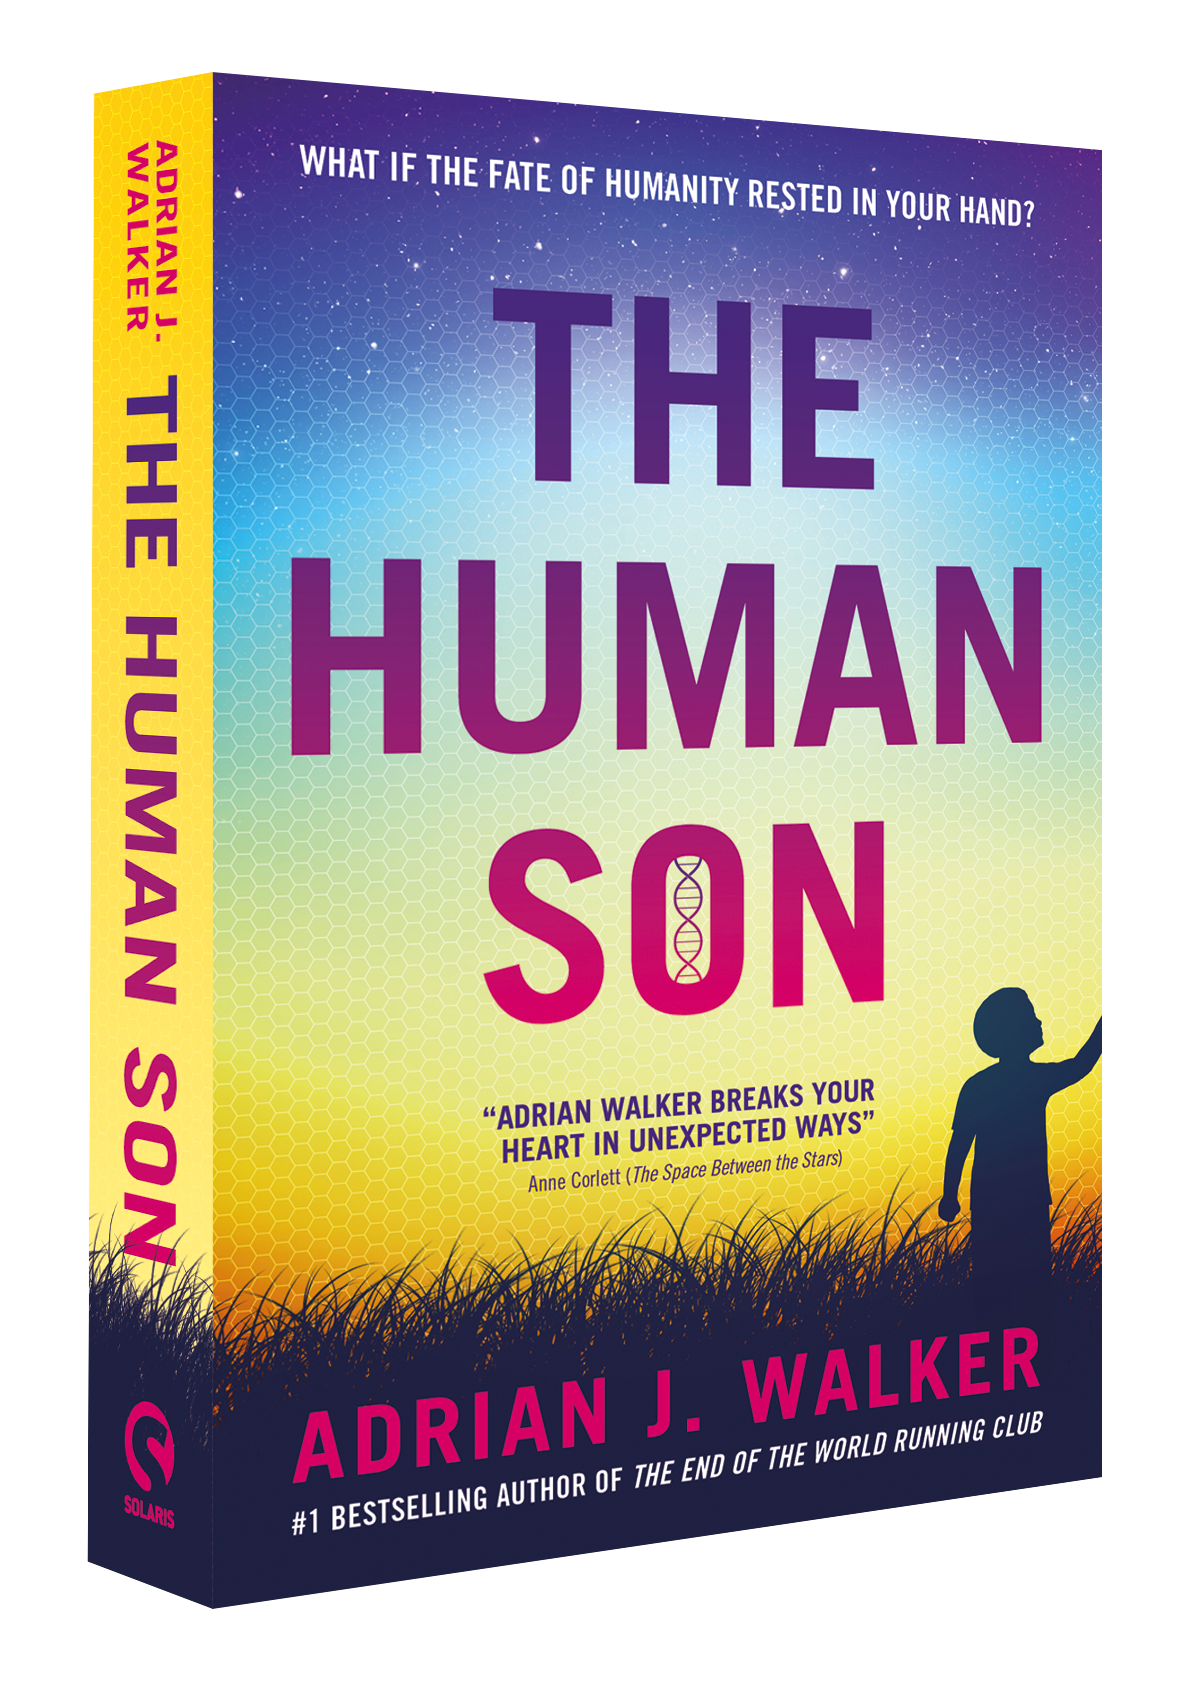 The Human Son review: Humanity and parental connections explored in new sci-fi novel